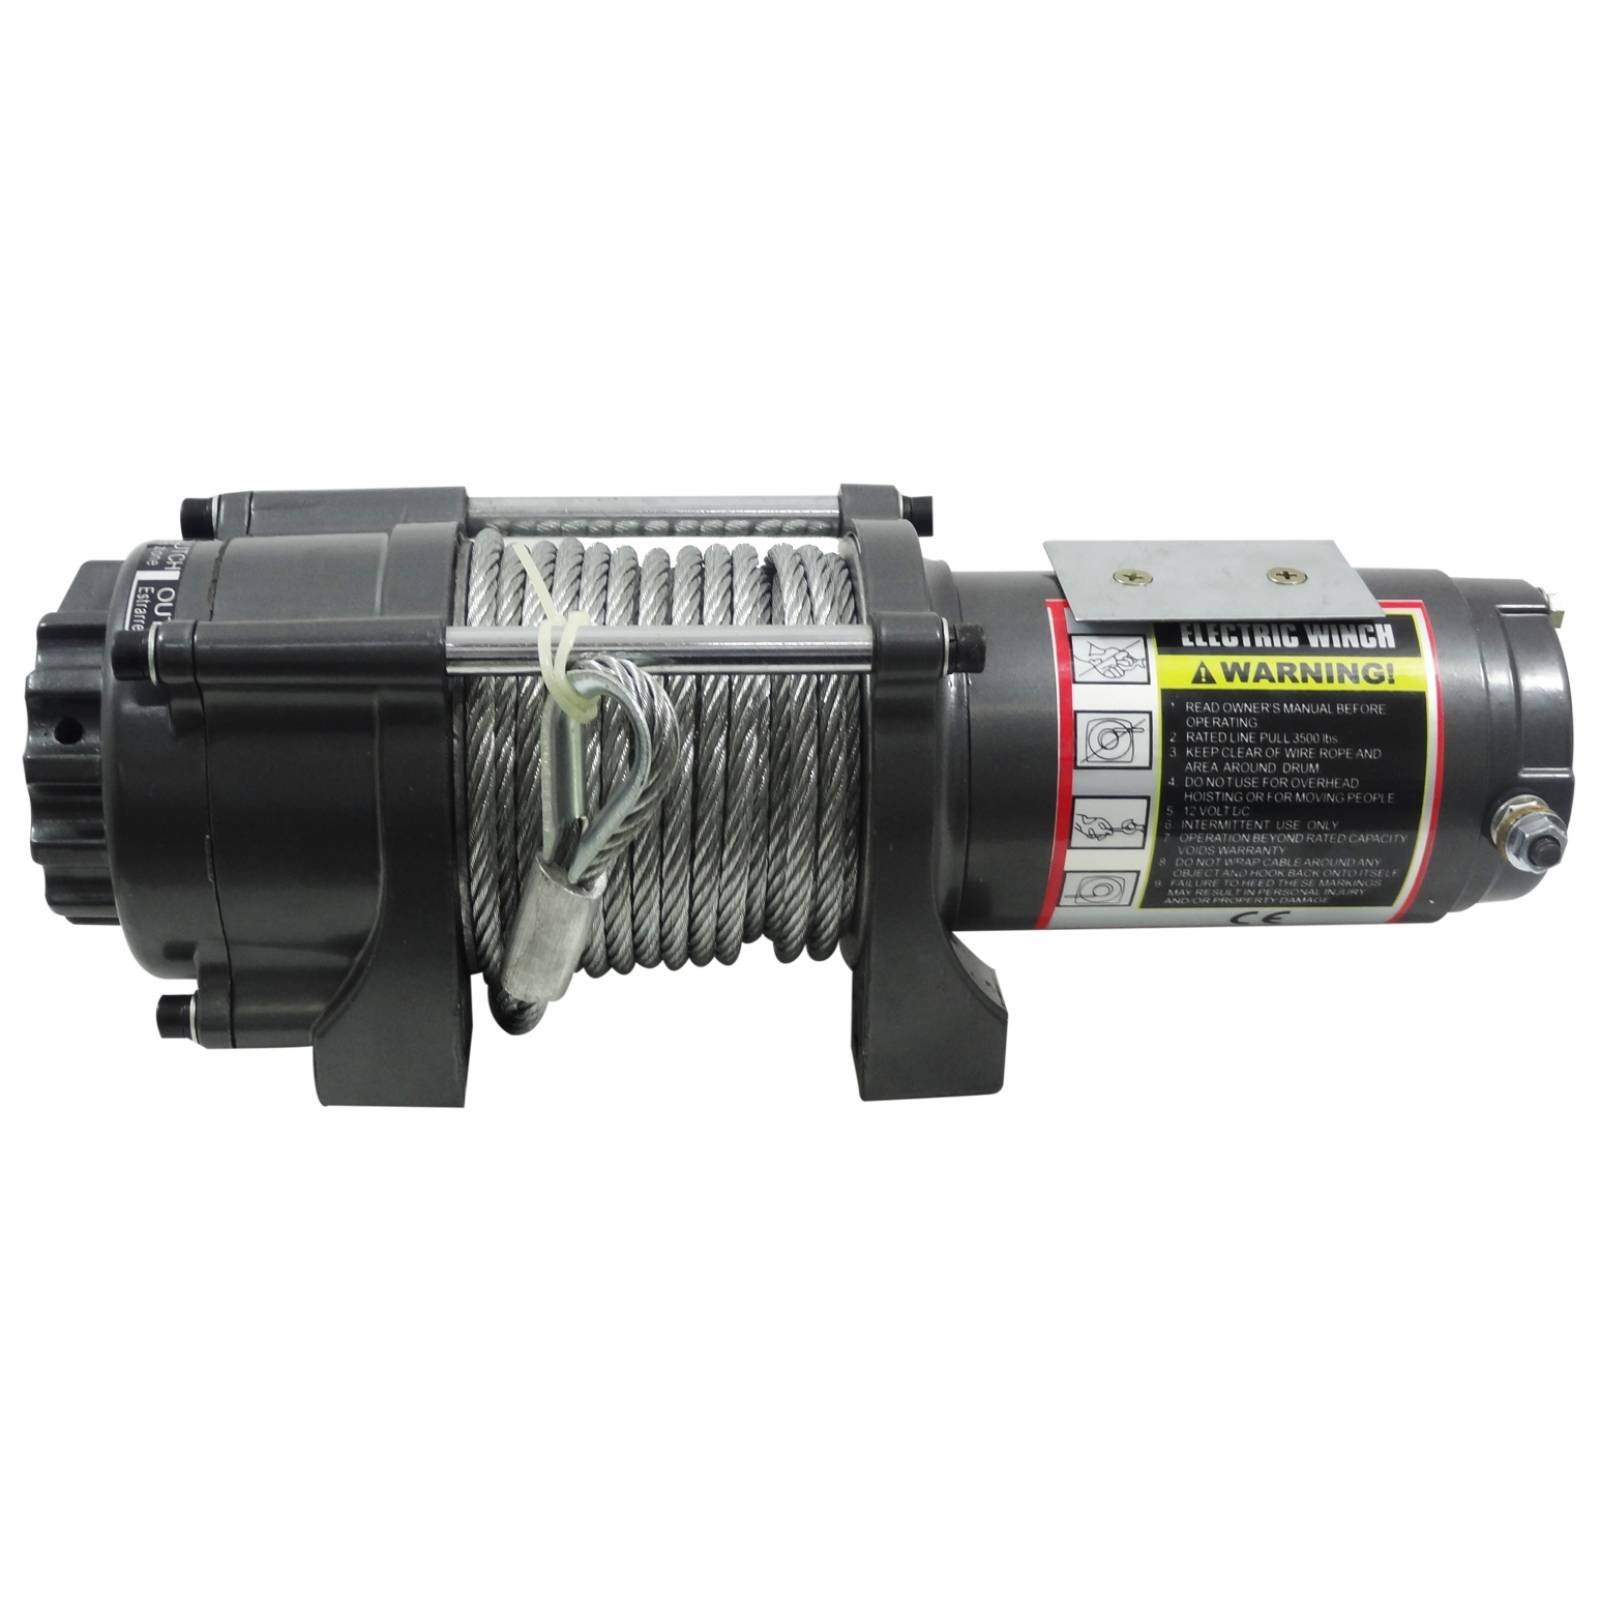 Malacate Winch 12V 3500 Lbs y Cable 13 m 1,60 T 6 MM